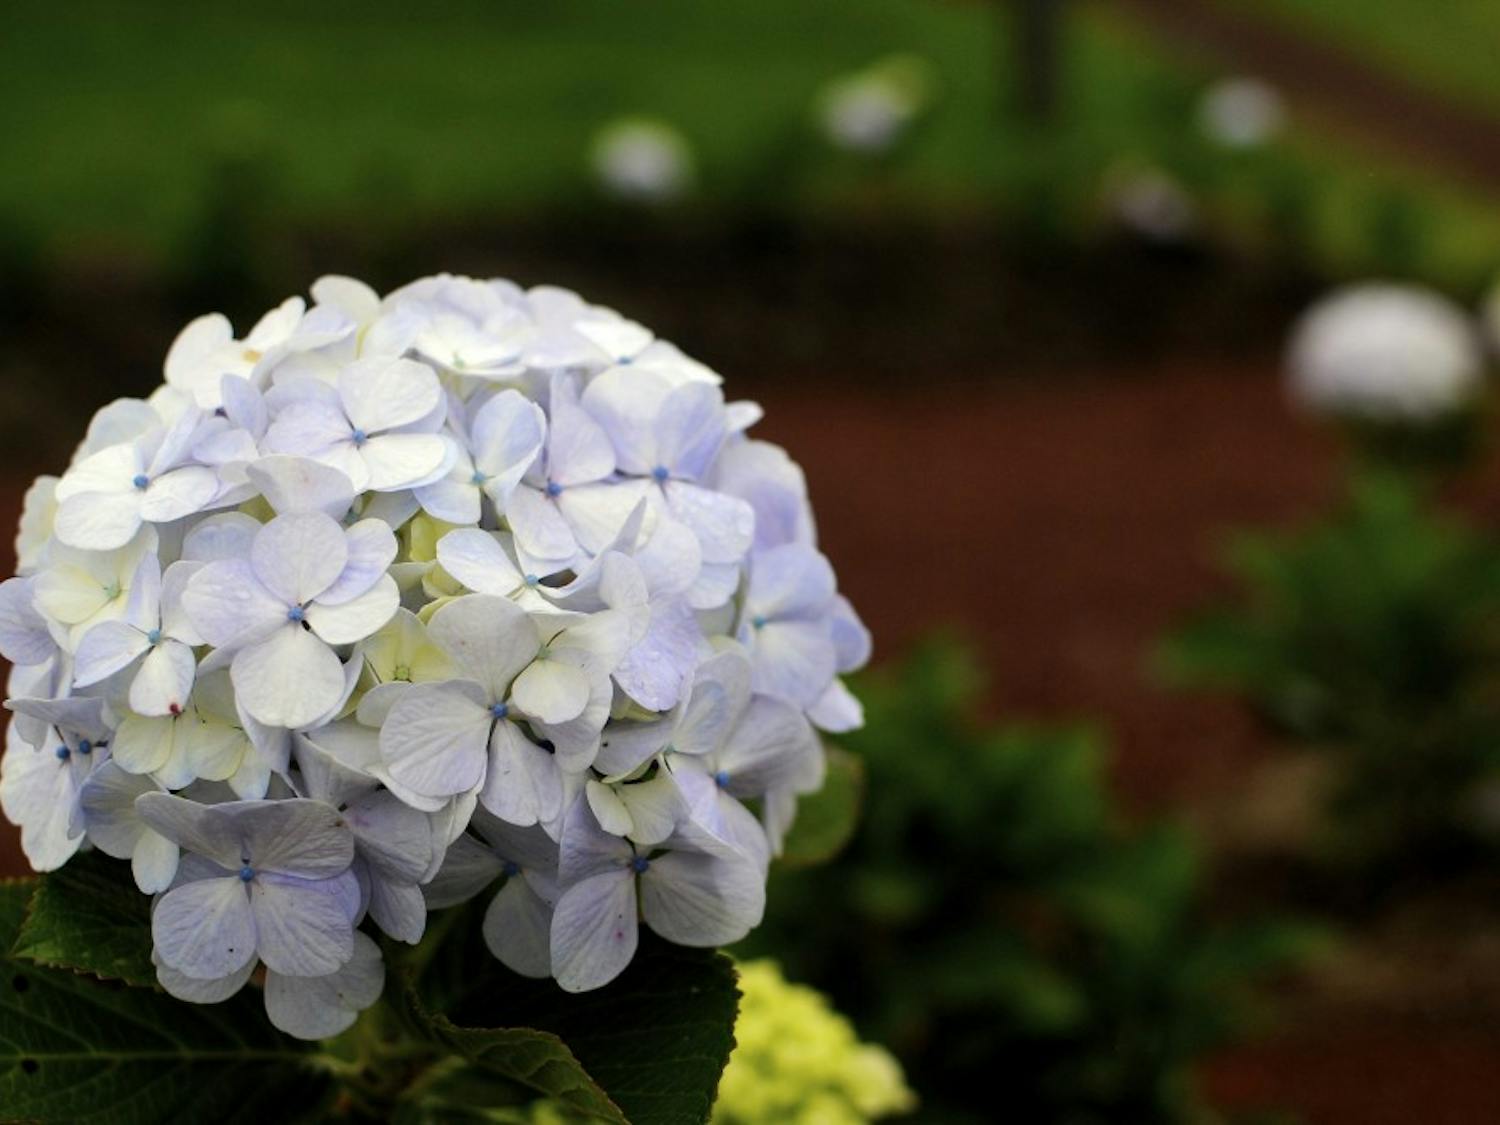 A hydrangea on Sunday, July 2, 2017 at Corso&nbsp;Lechería in Costa Rica. Hydrangeas are popular flowers in Costa Rica, and can be seen planted in the gardens outside of Costa Rican homes.